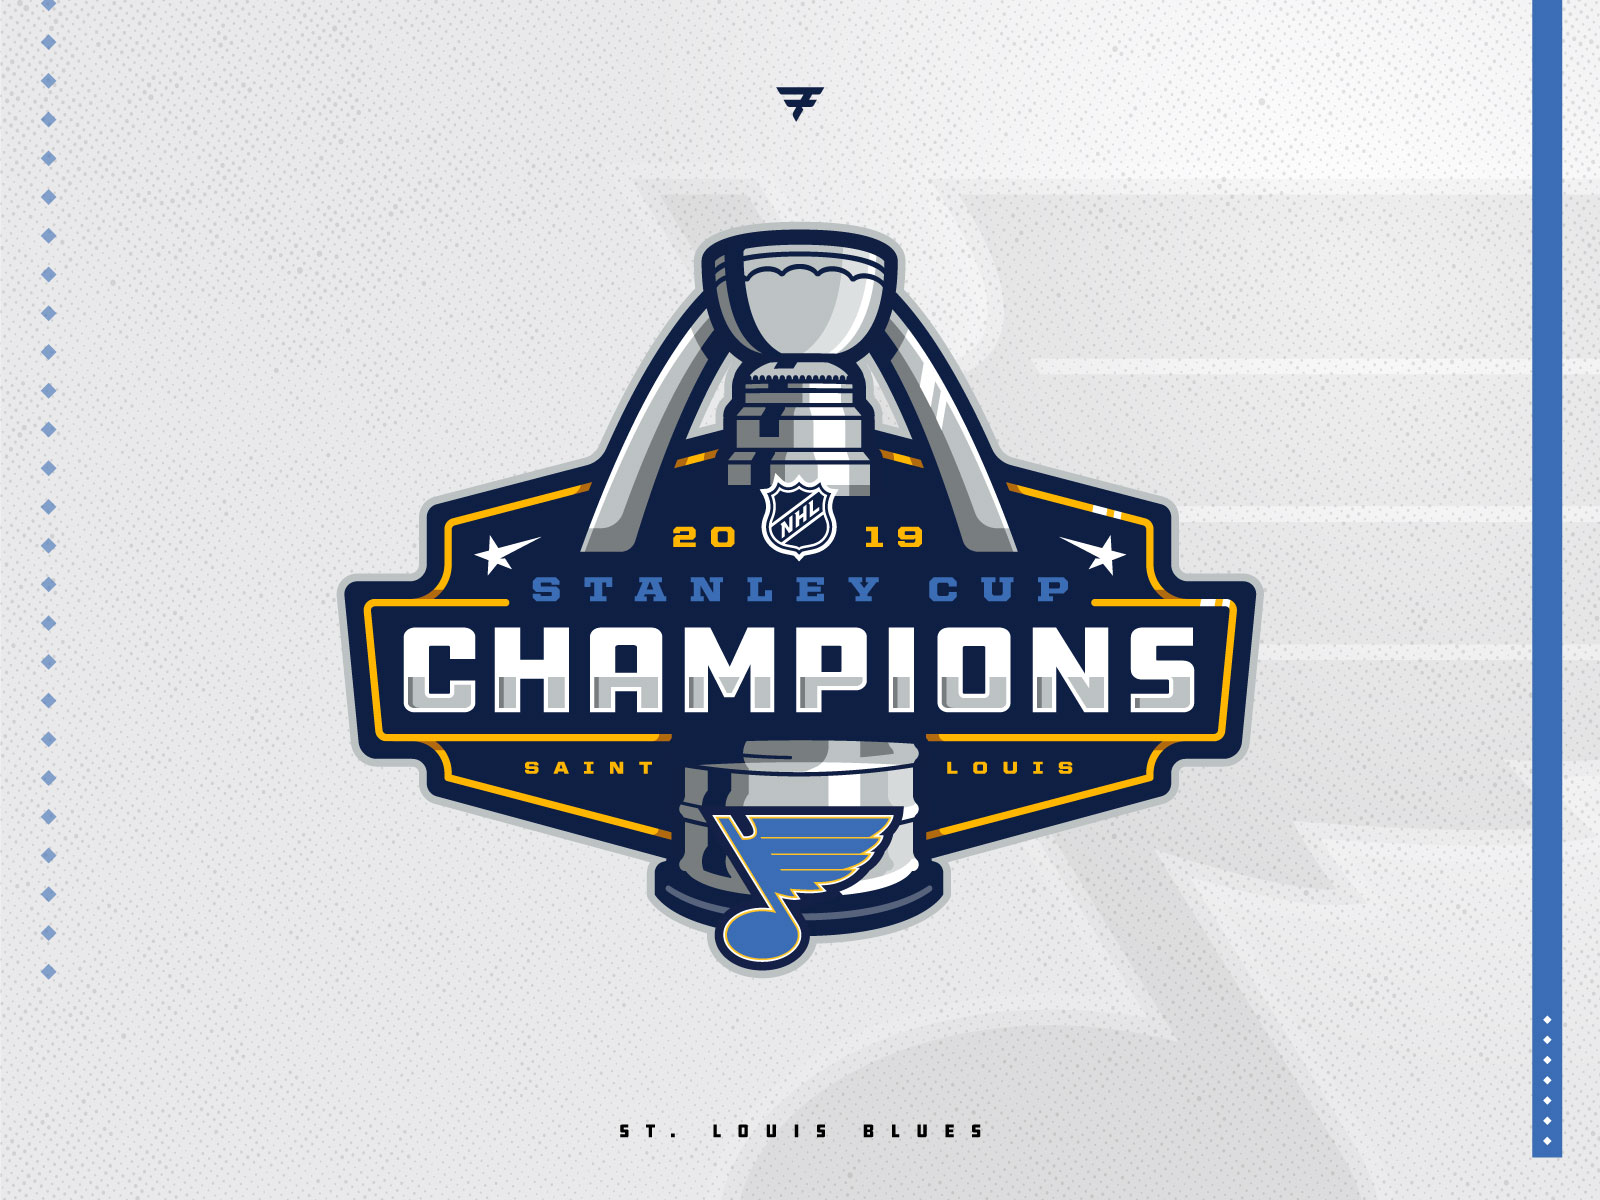 Dribbble - stanley_cup_champions_logo.jpg by Grant O'Dell